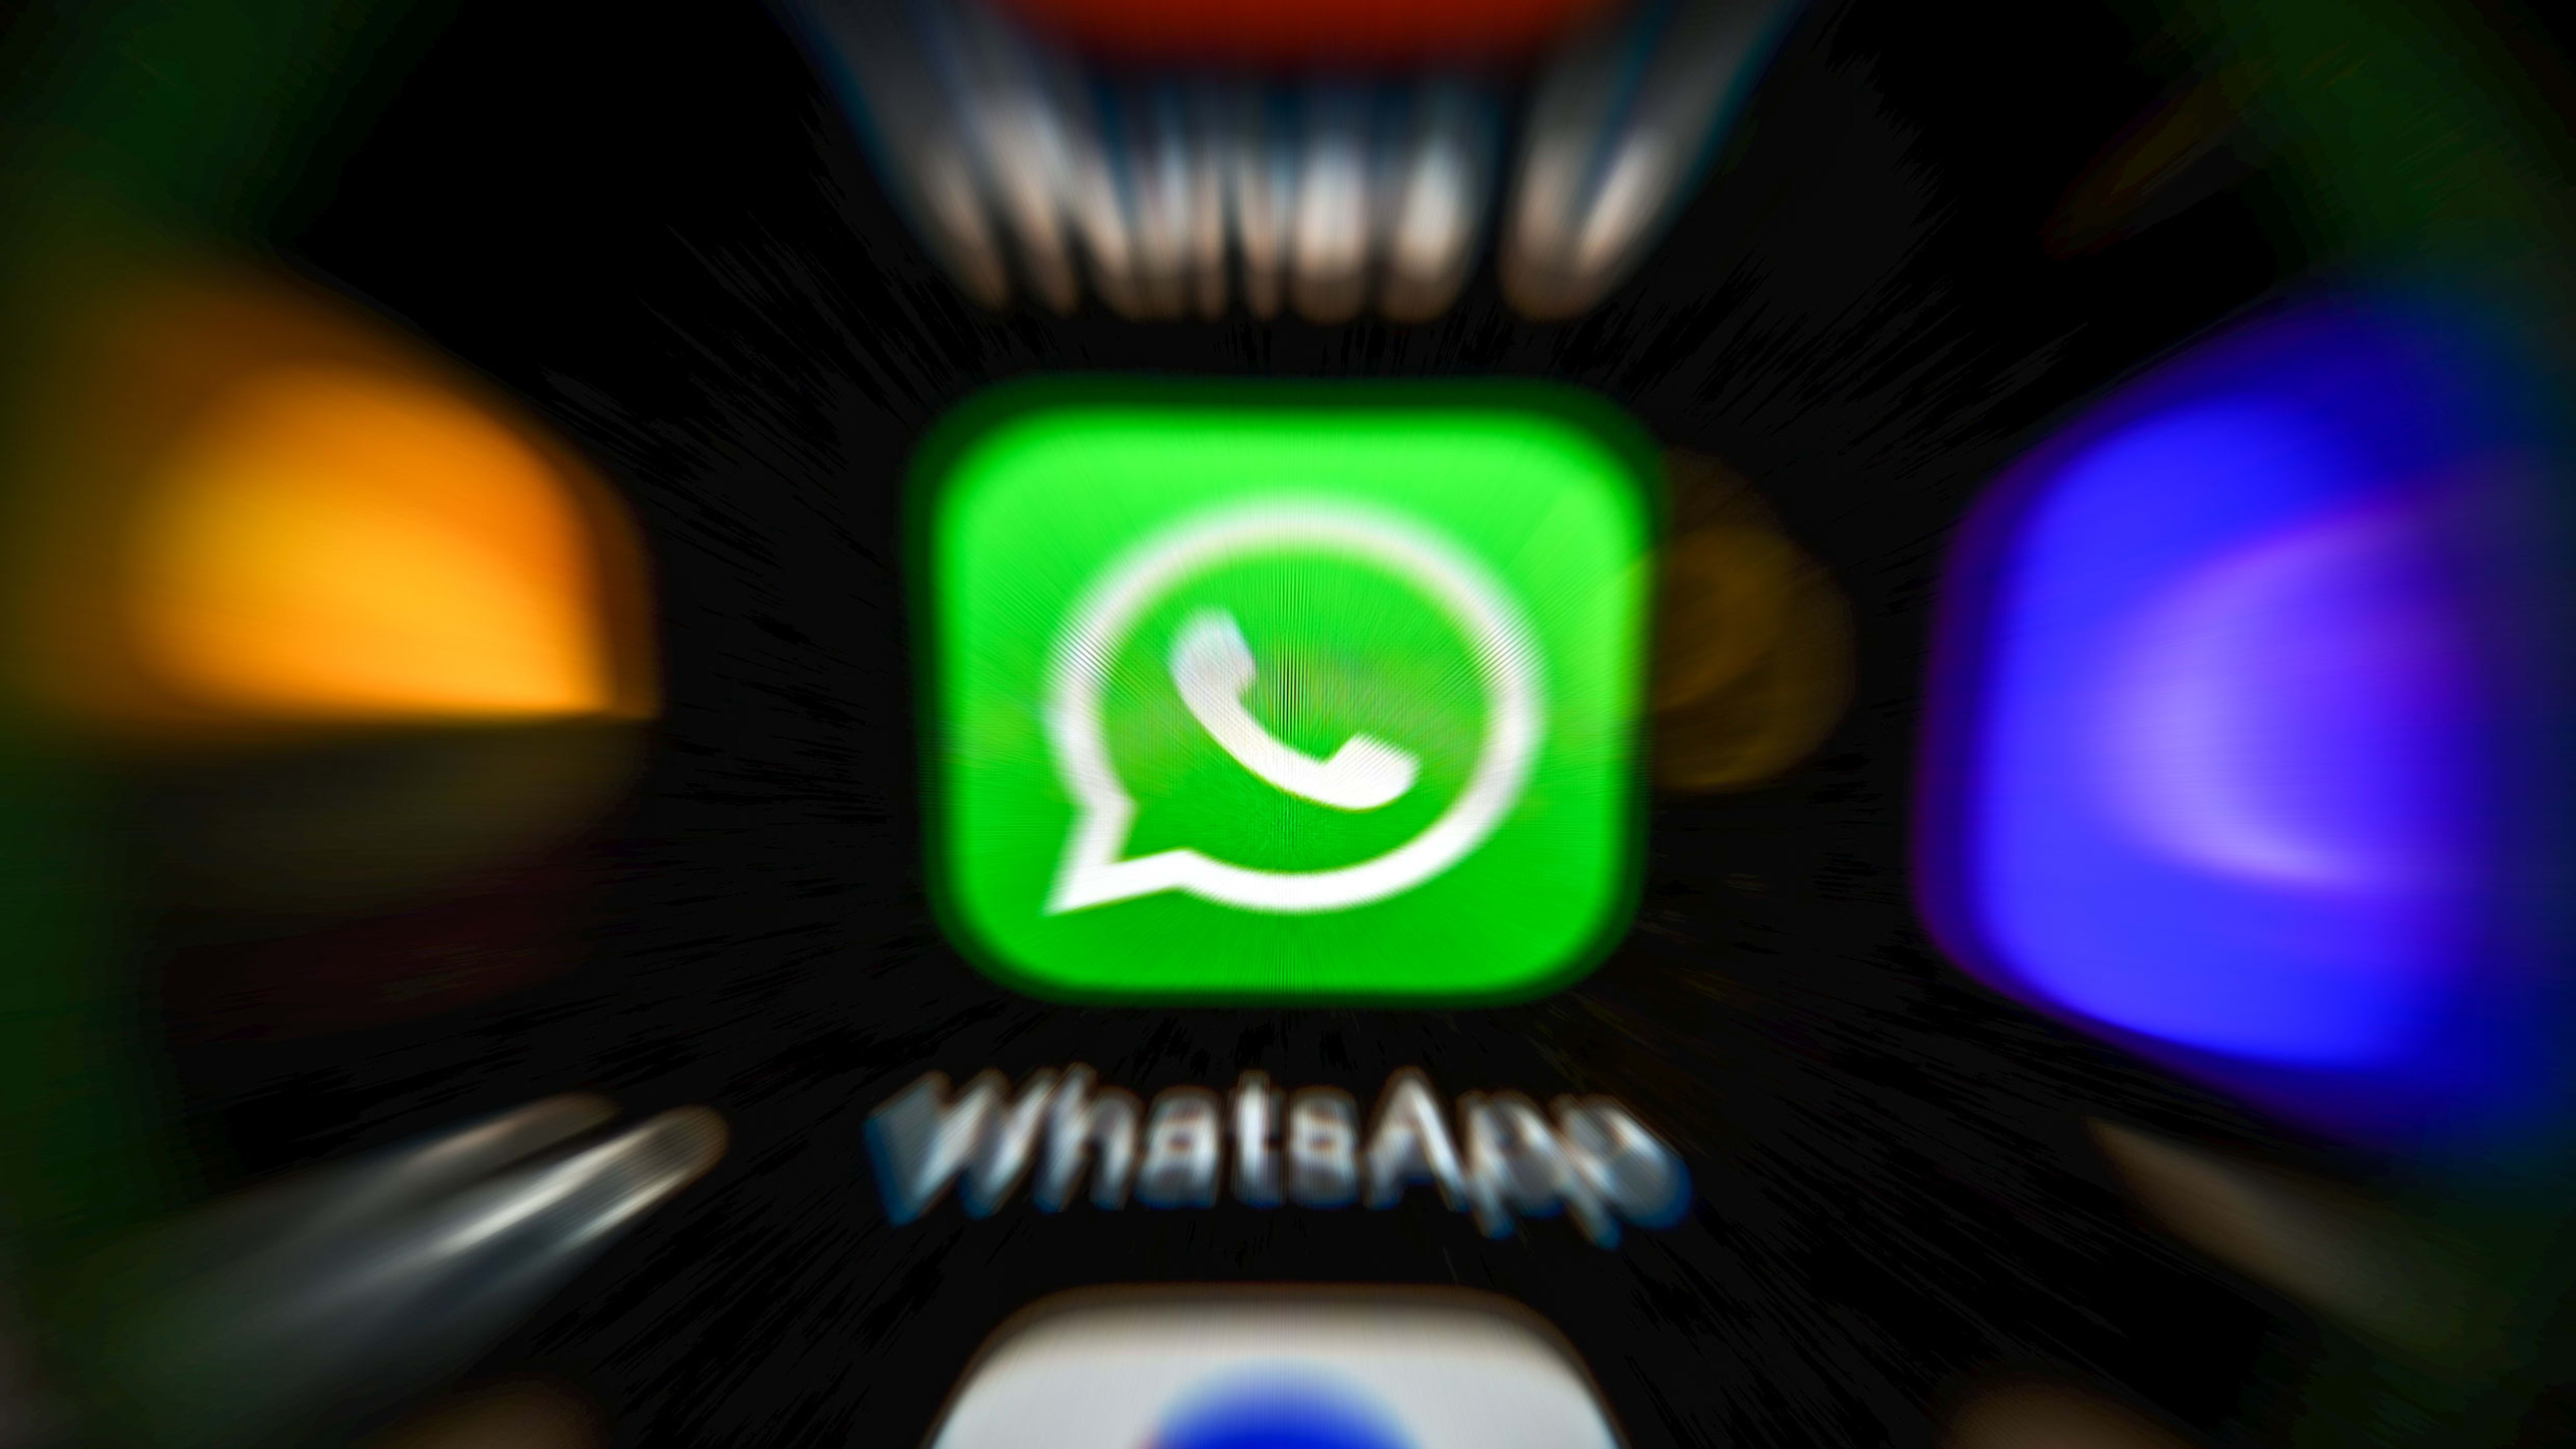 Meta’s WhatsApp aims to build ‘the most private broadcast service’ in the world